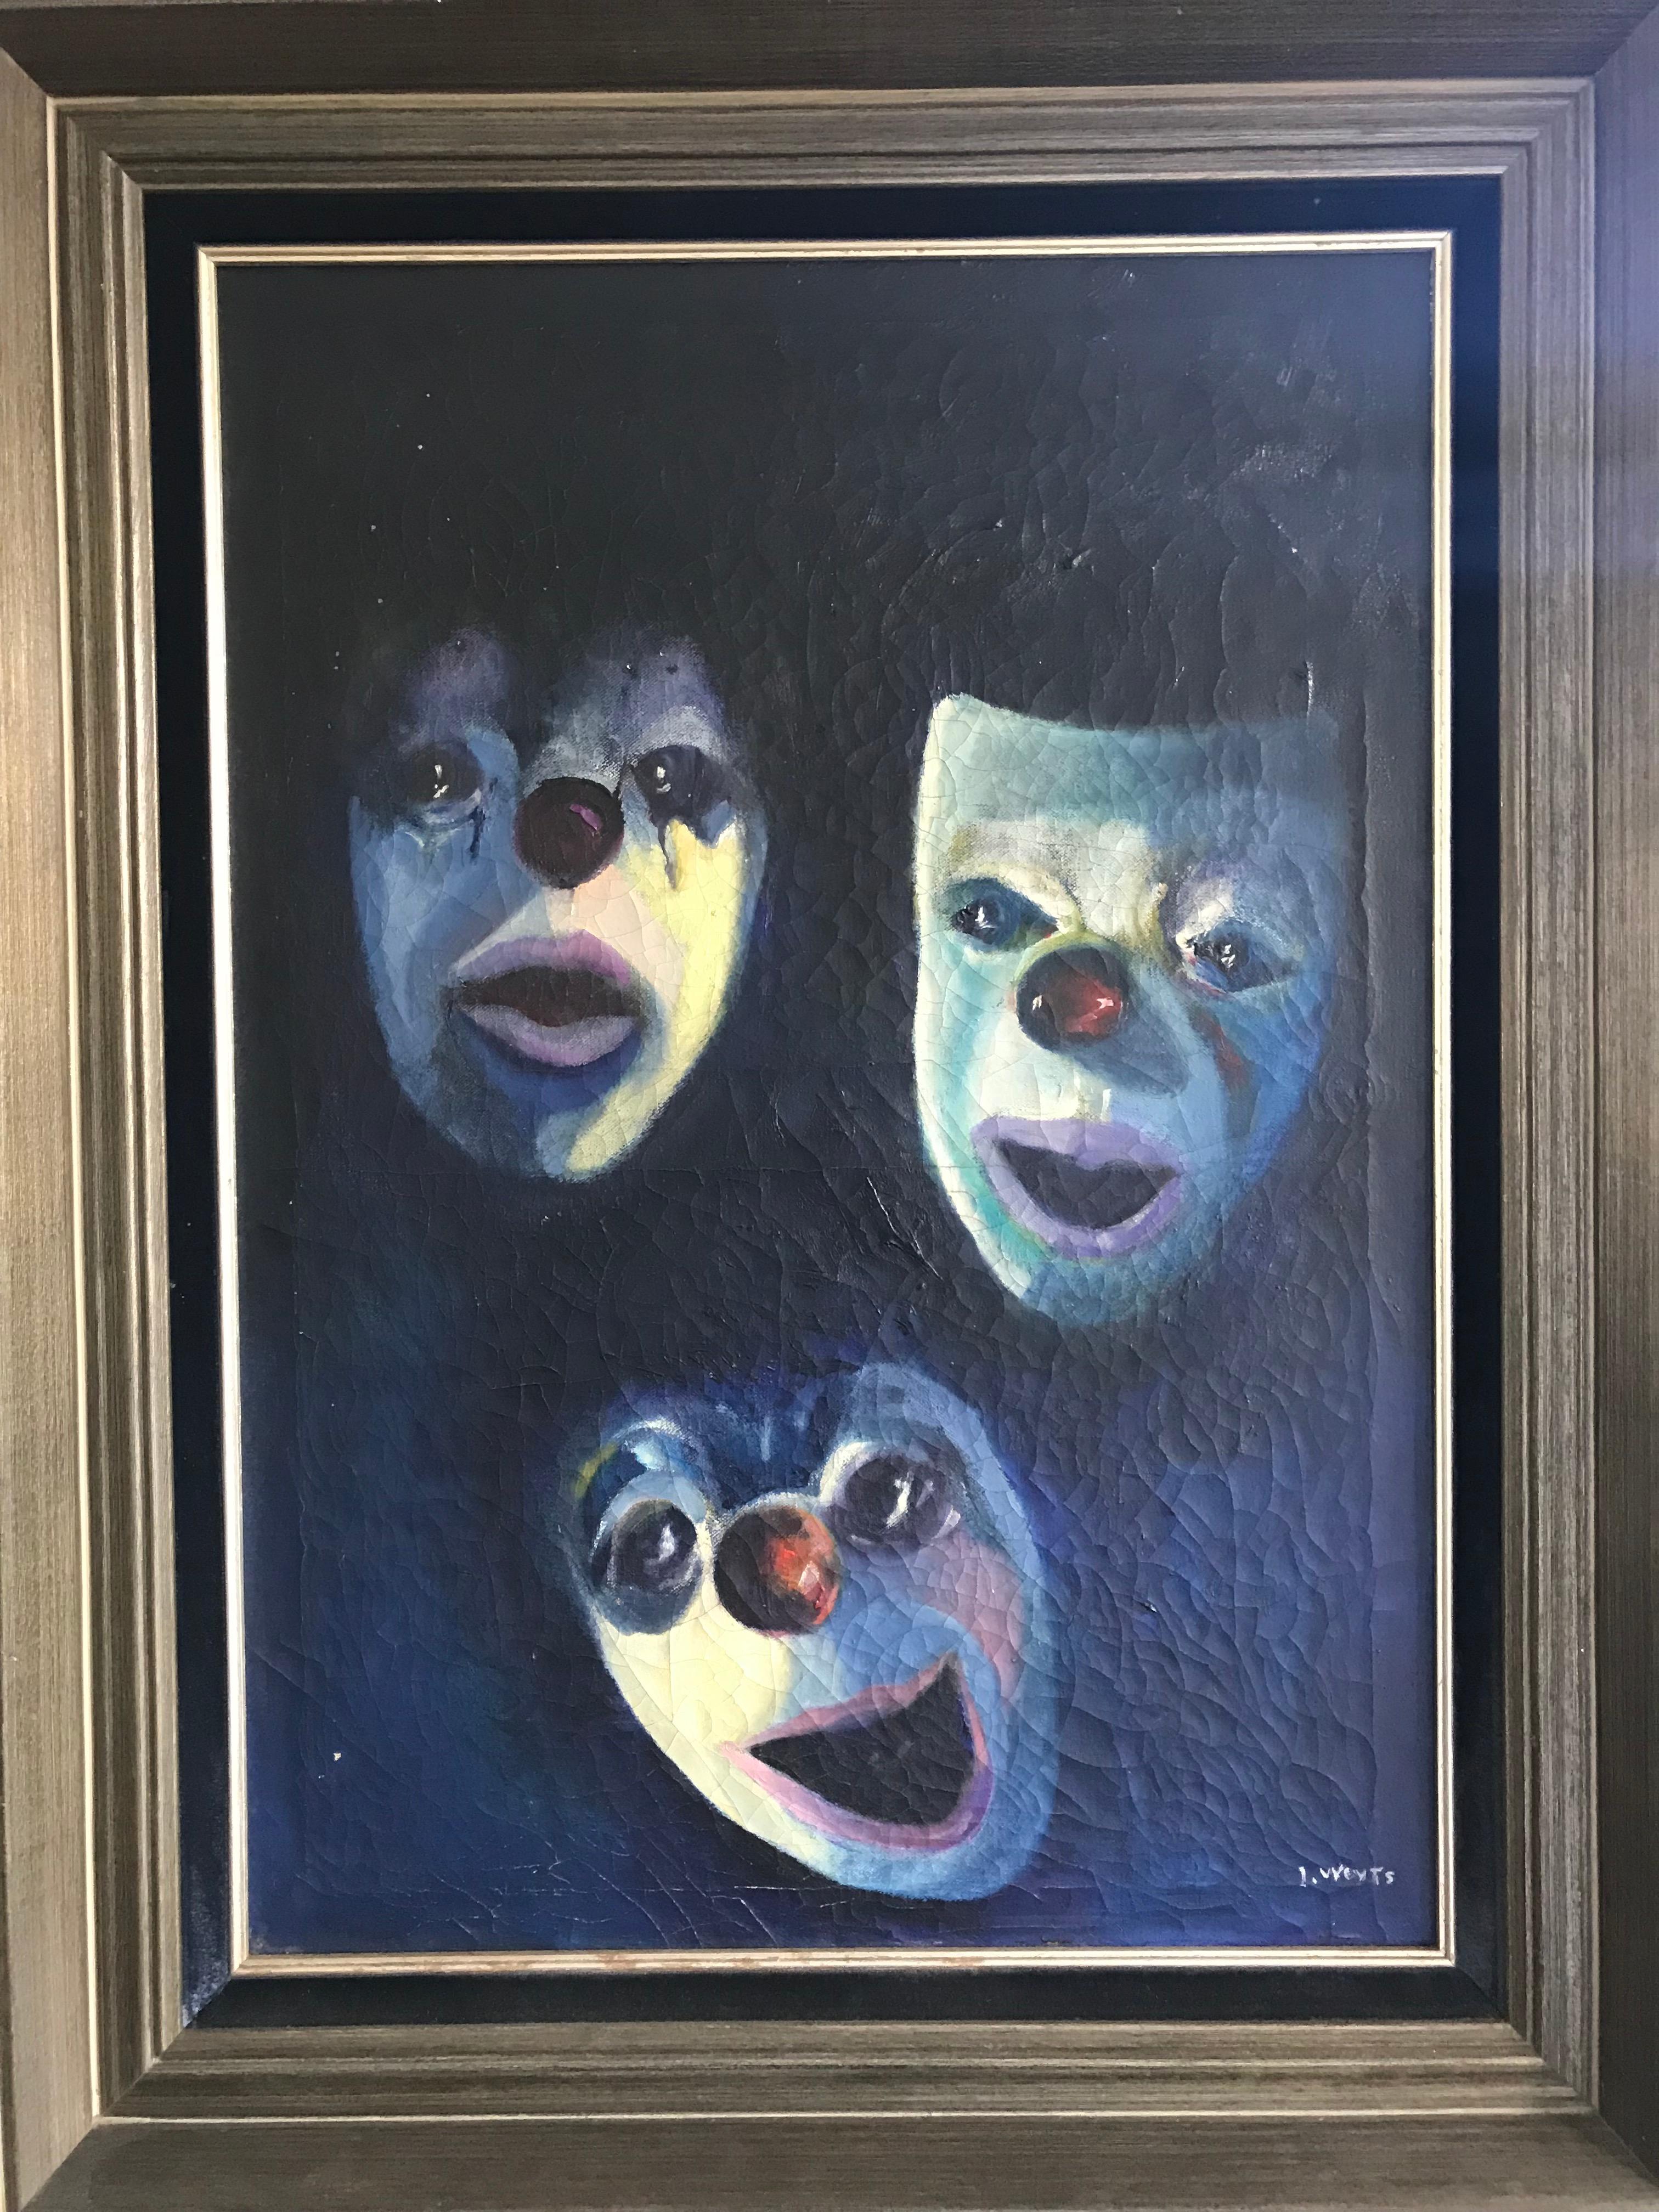 Antique Oil on Canvas Painting Showing Emotional Clown / Mime Masks by I. Weyts In Good Condition For Sale In Lisse, NL